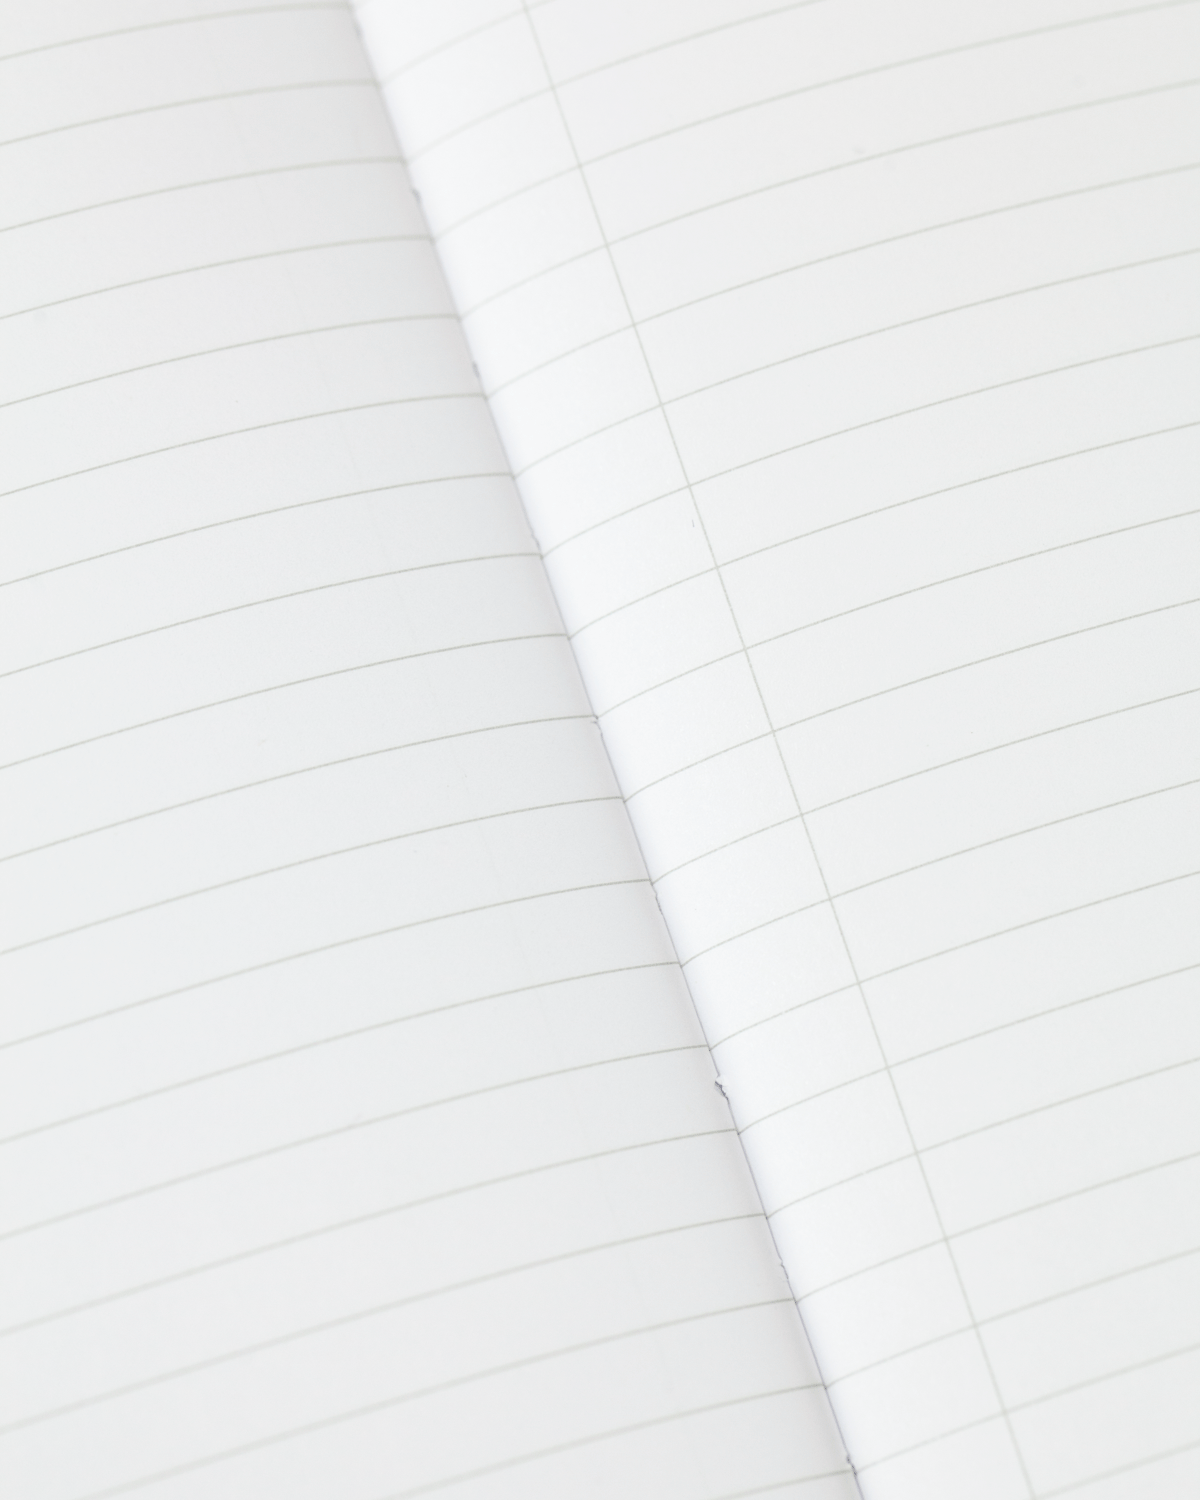 Linguistics Softcover Notebook - Lined